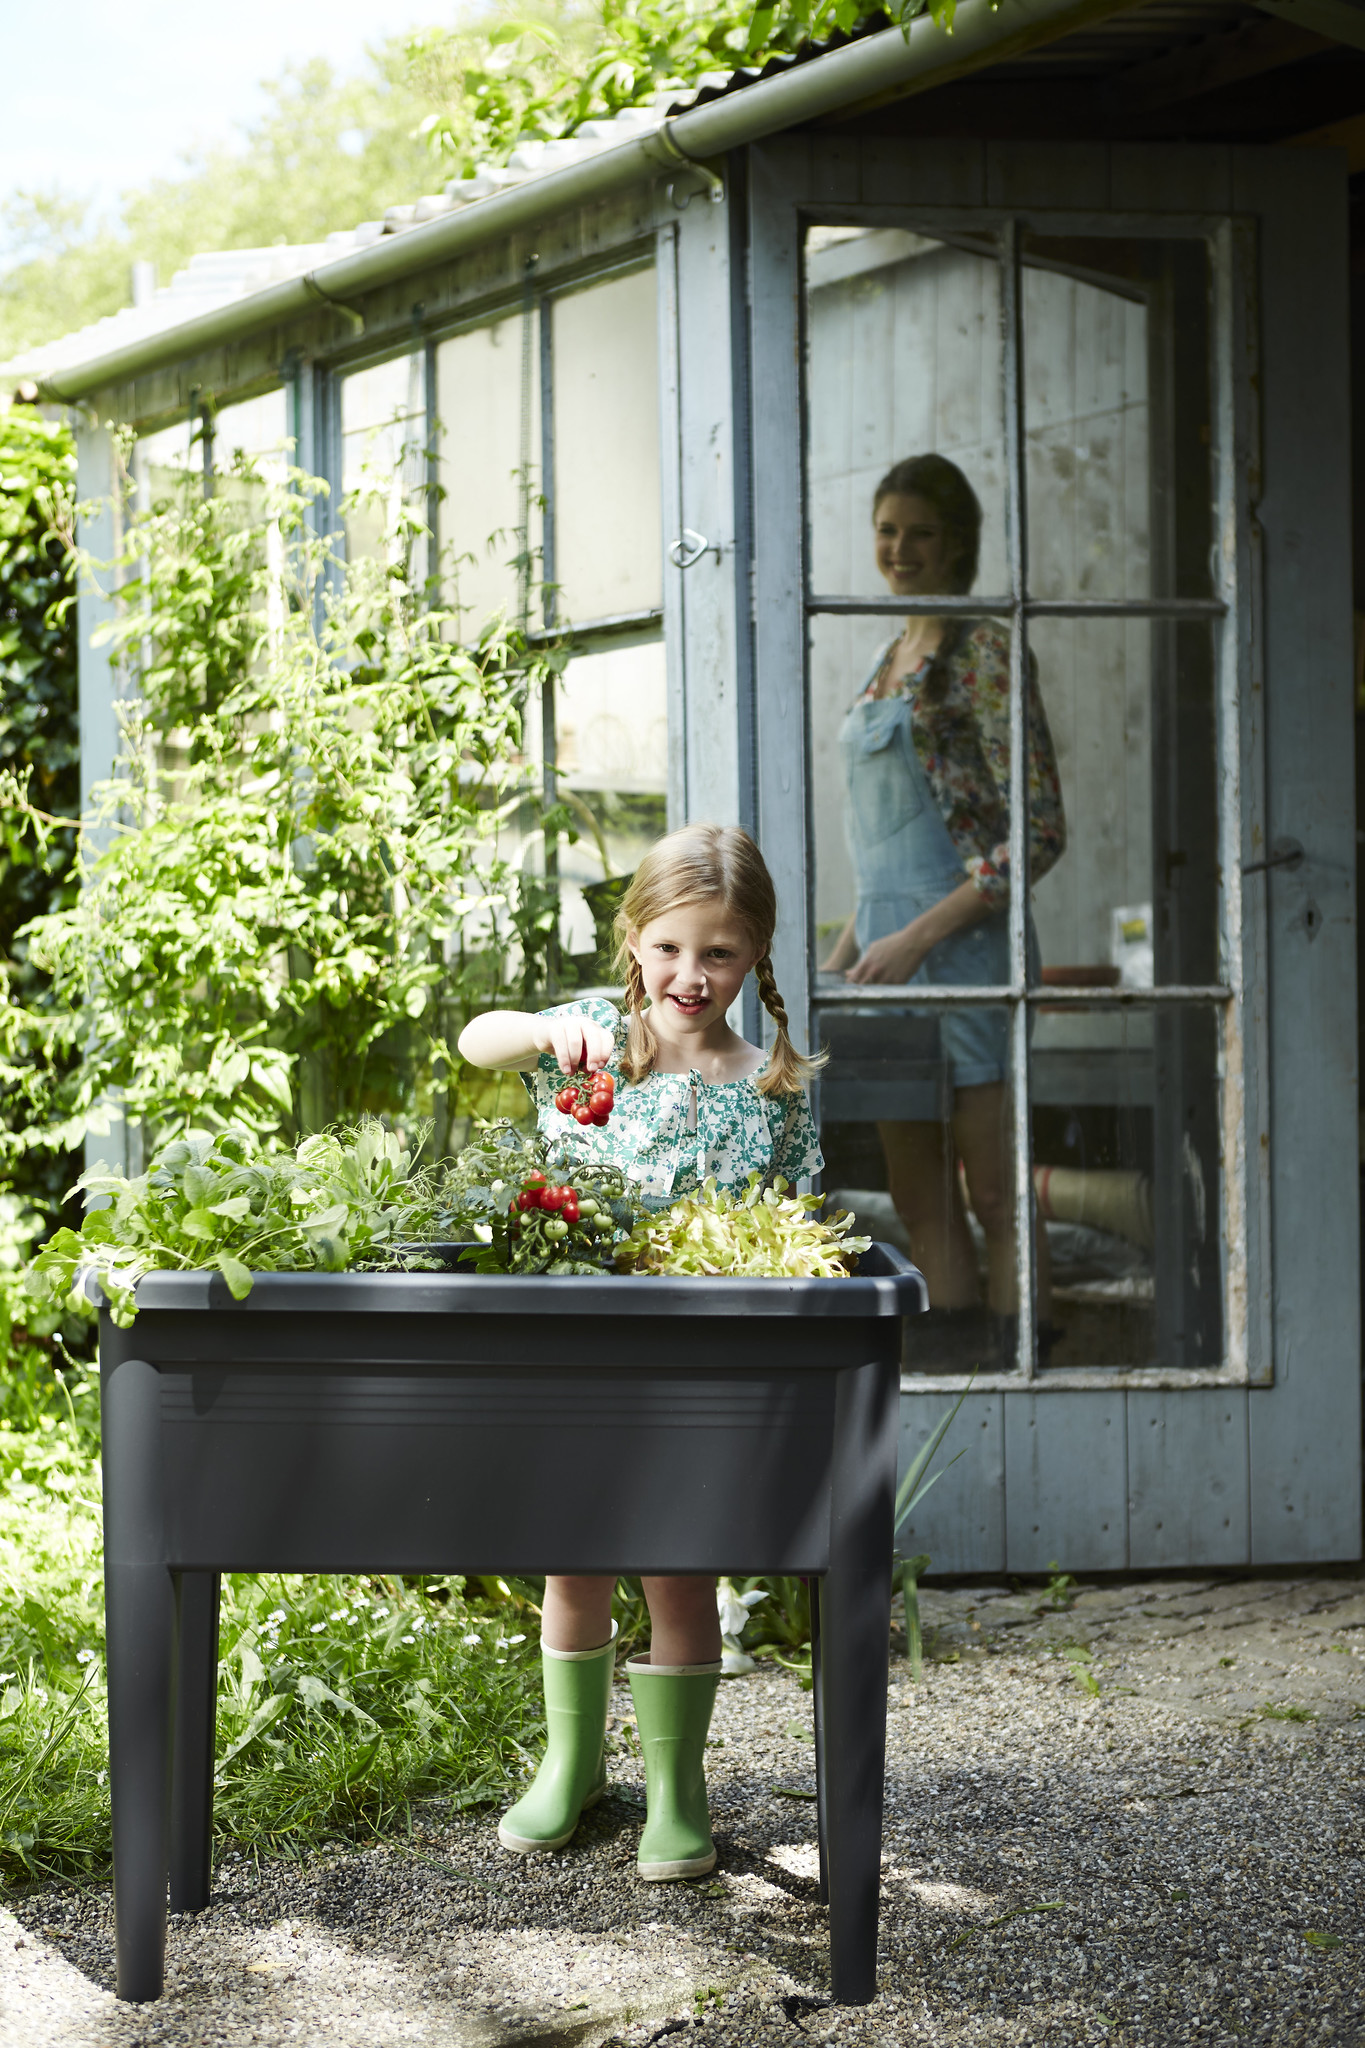 Georgina Ingham | Culinary Travels Photograph Elho Grow Table - Child Gardening. Culinary Travels Giveaway